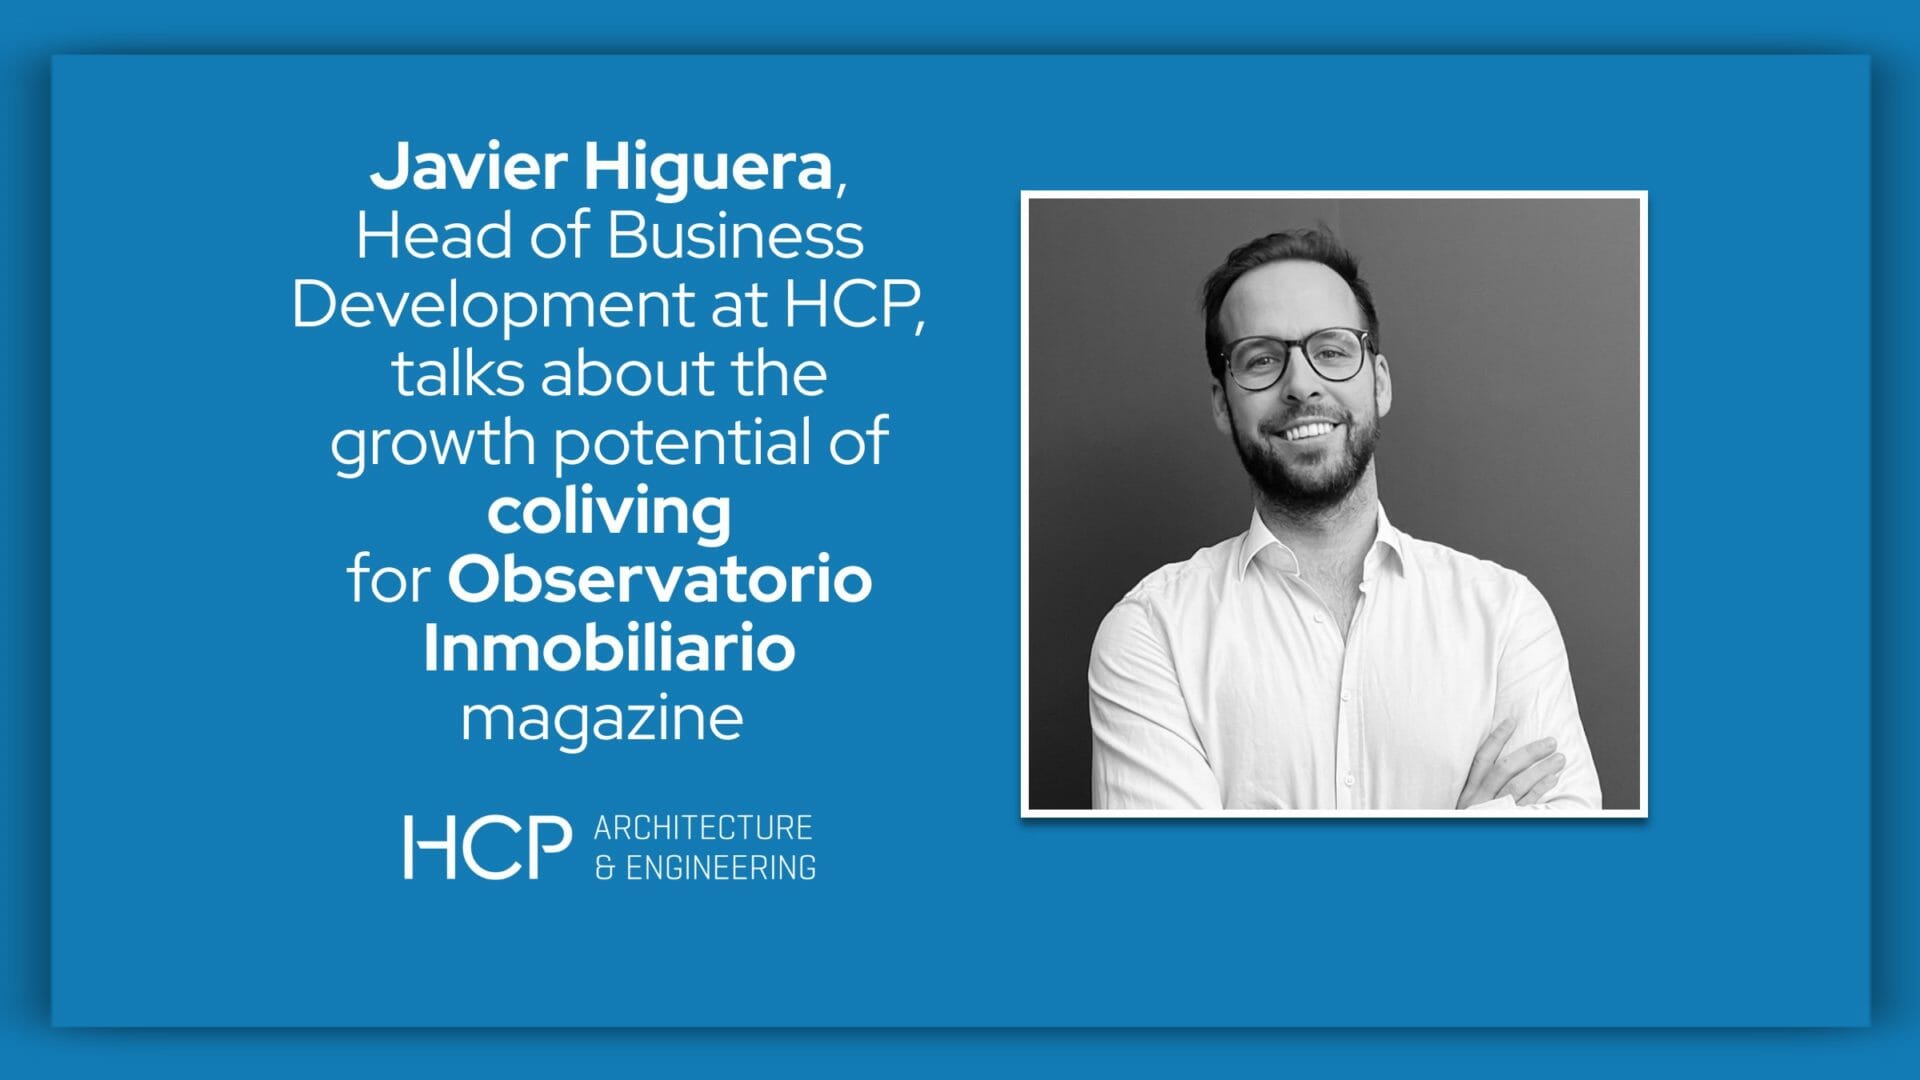 Javier Higuera talks about coliving for Observatorio Inmobiliario magazine